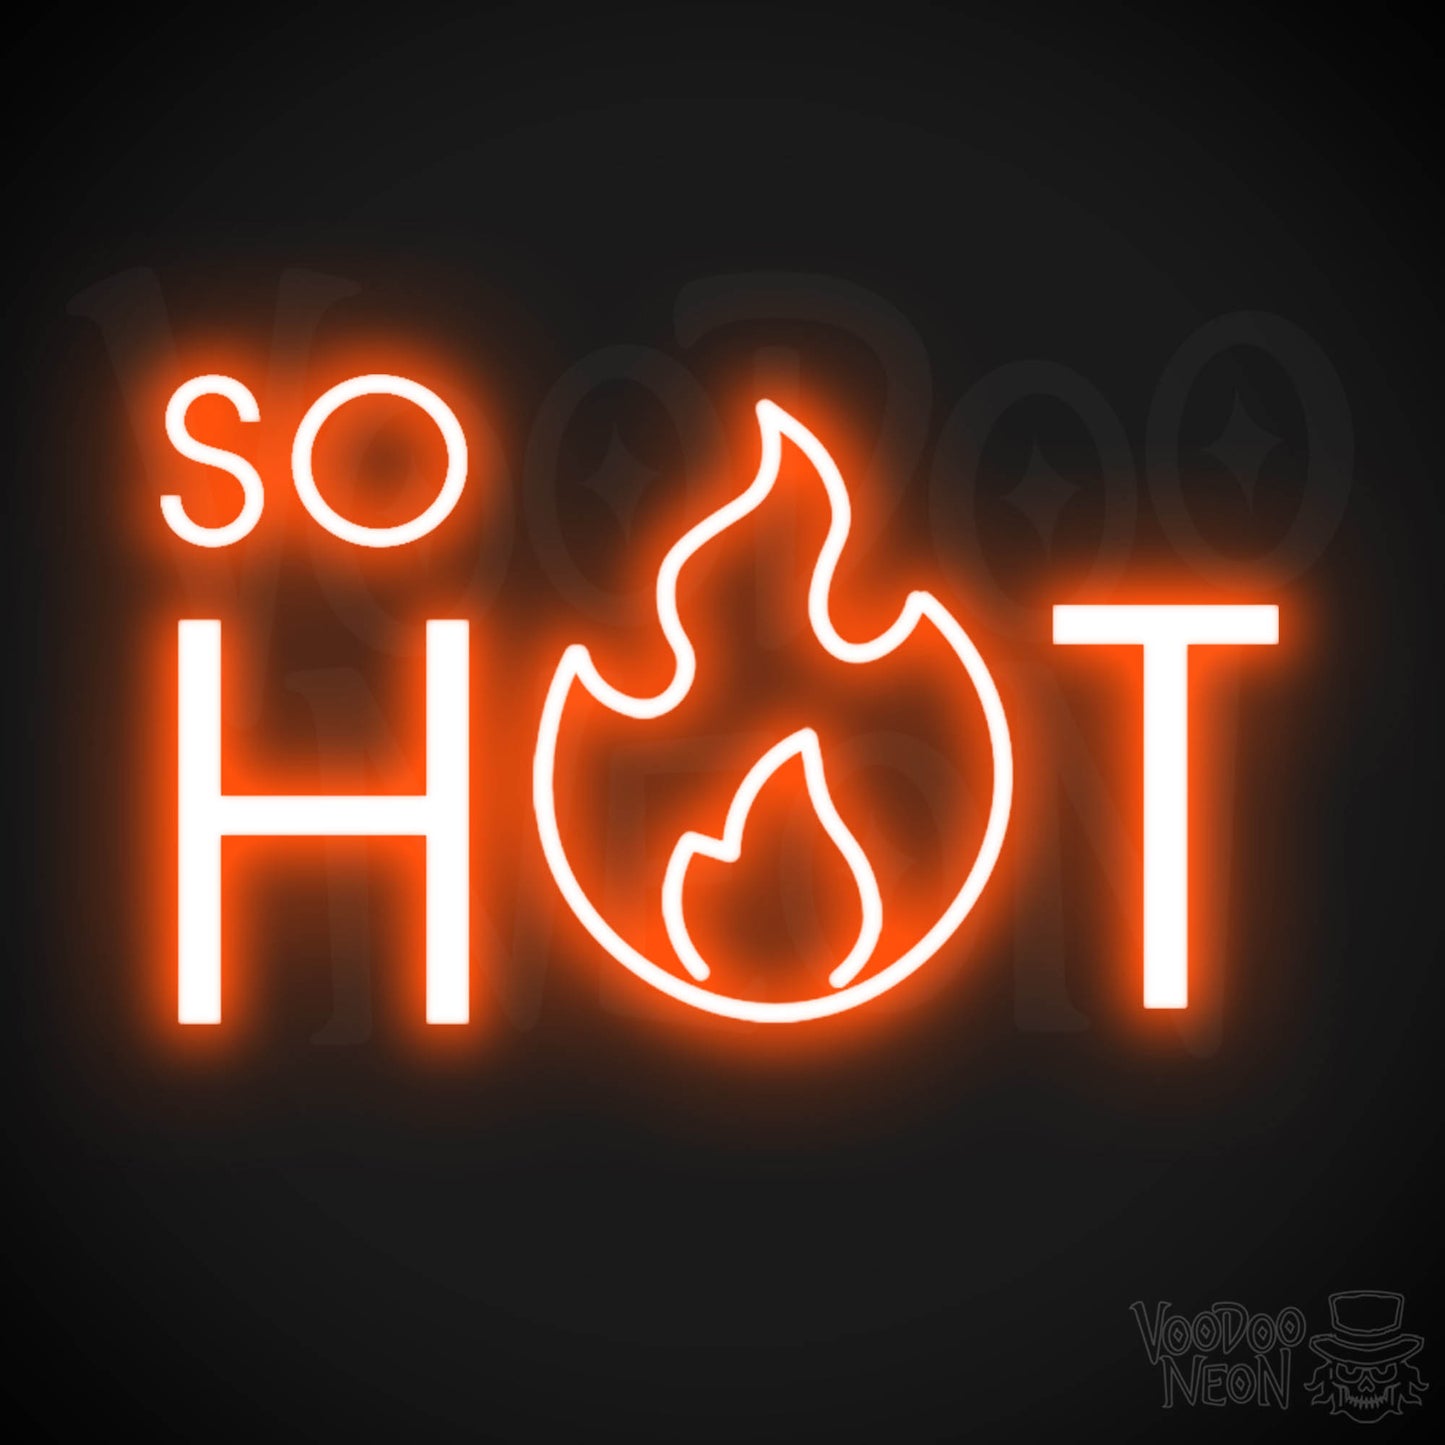 So Hot Neon Sign - Neon So Hot Sign - LED Neon Wall Art - Color Orange